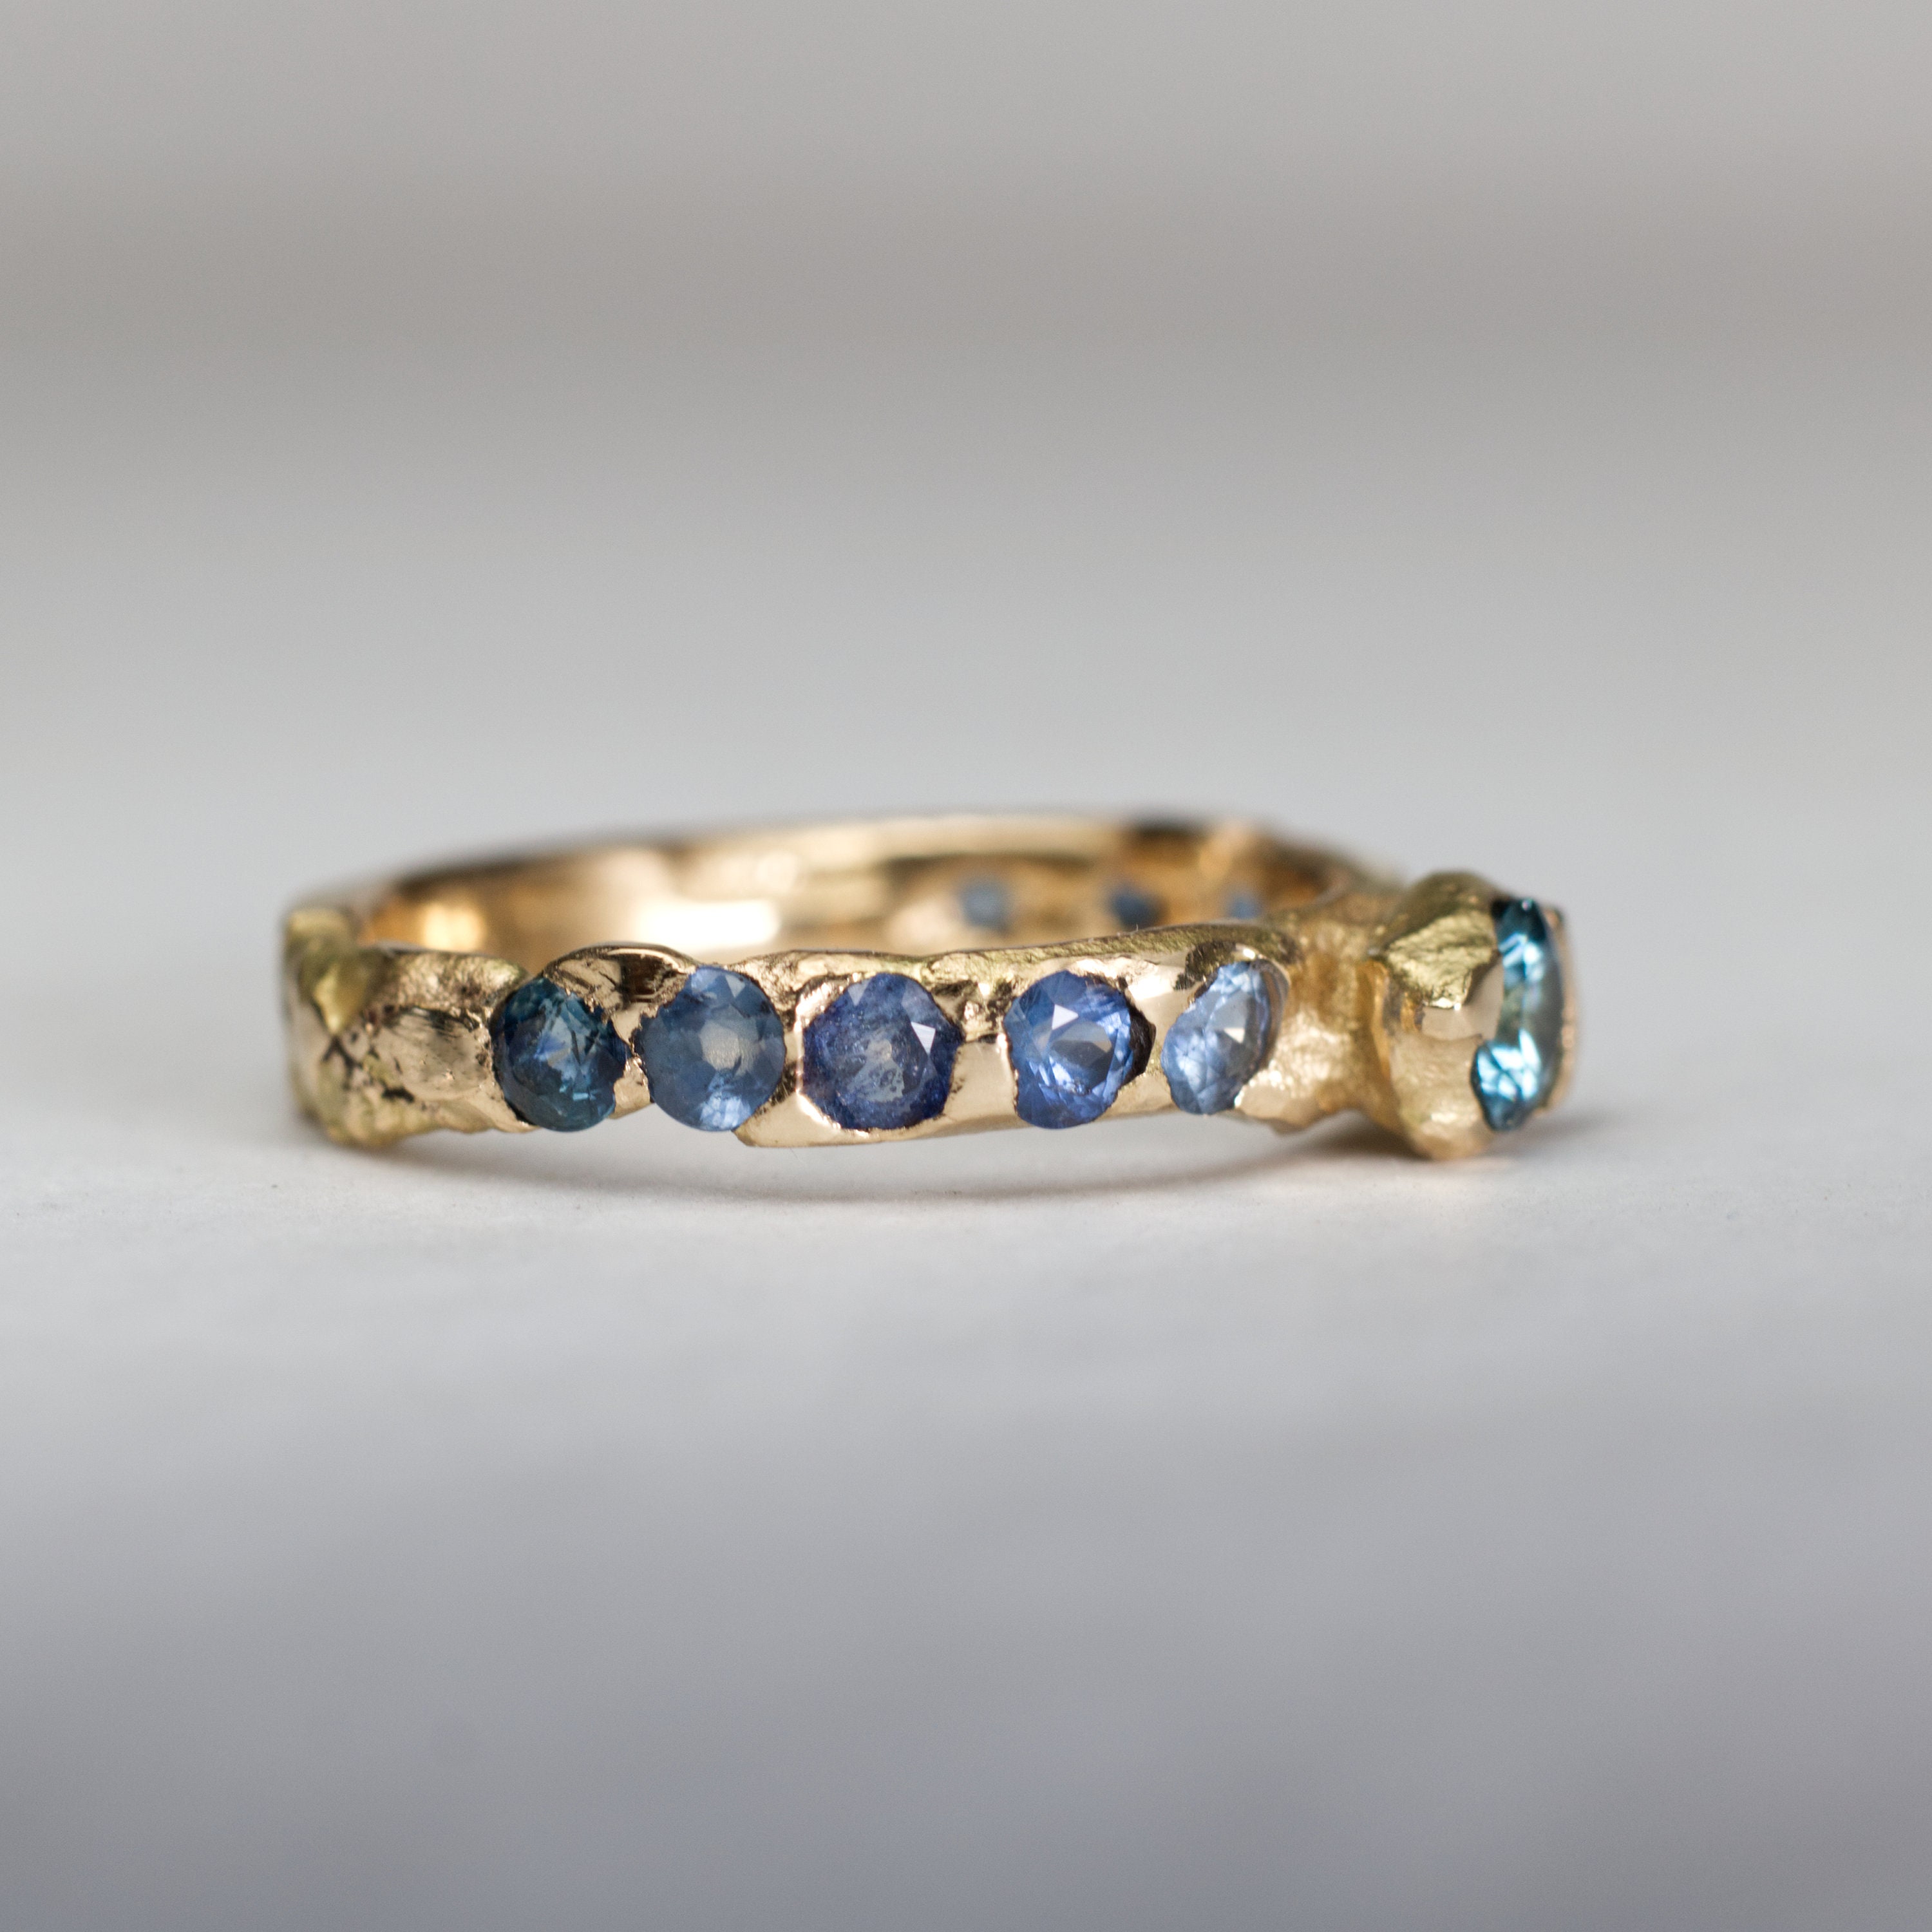 Montana Sapphire Engagement Ring Recycled 18k Gold Montana - Etsy